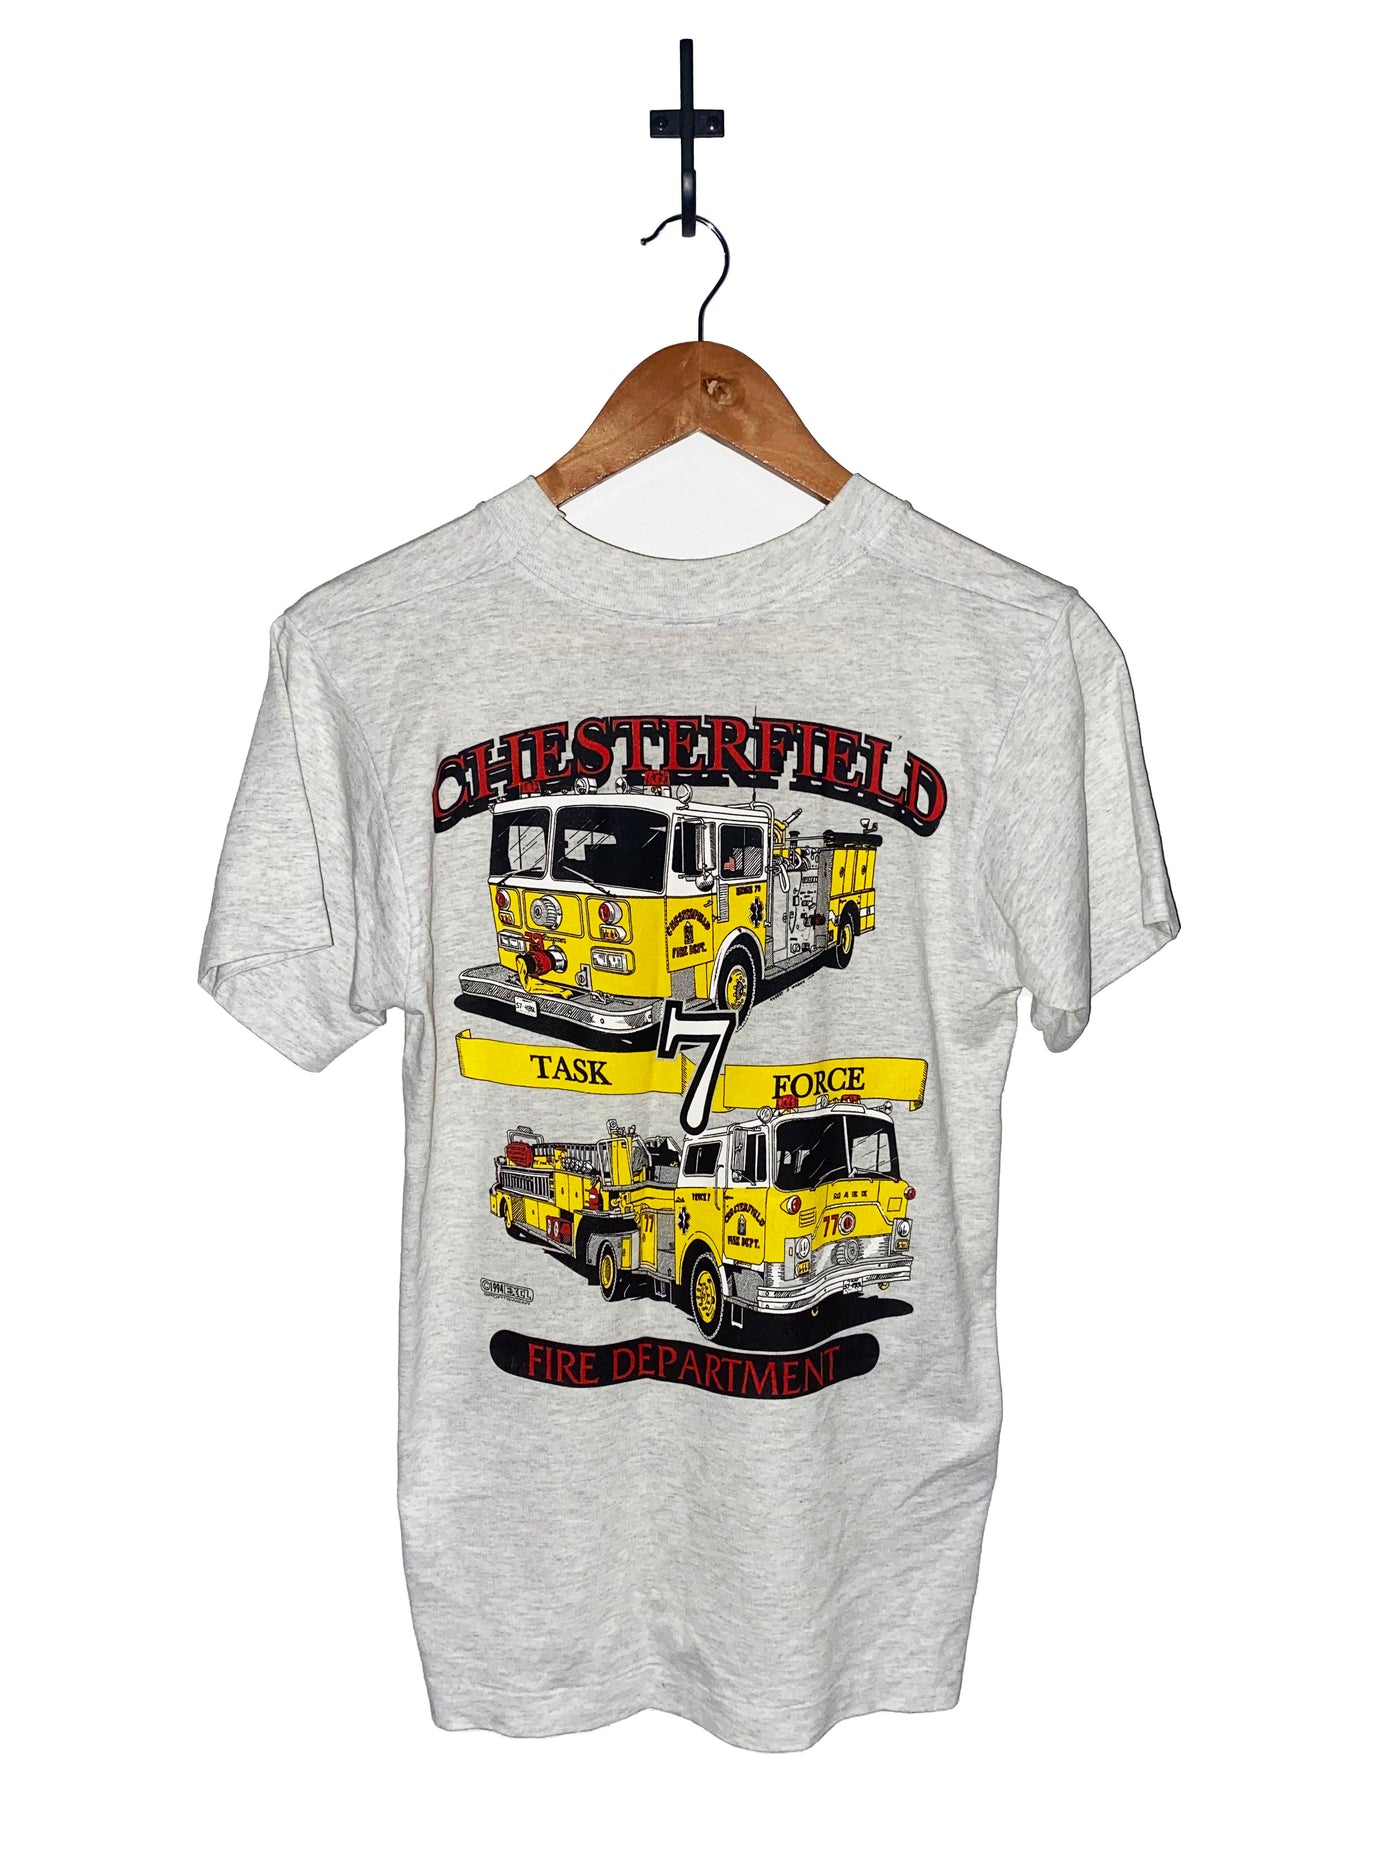 Vintage Chesterfield Fire Department T-Shirt